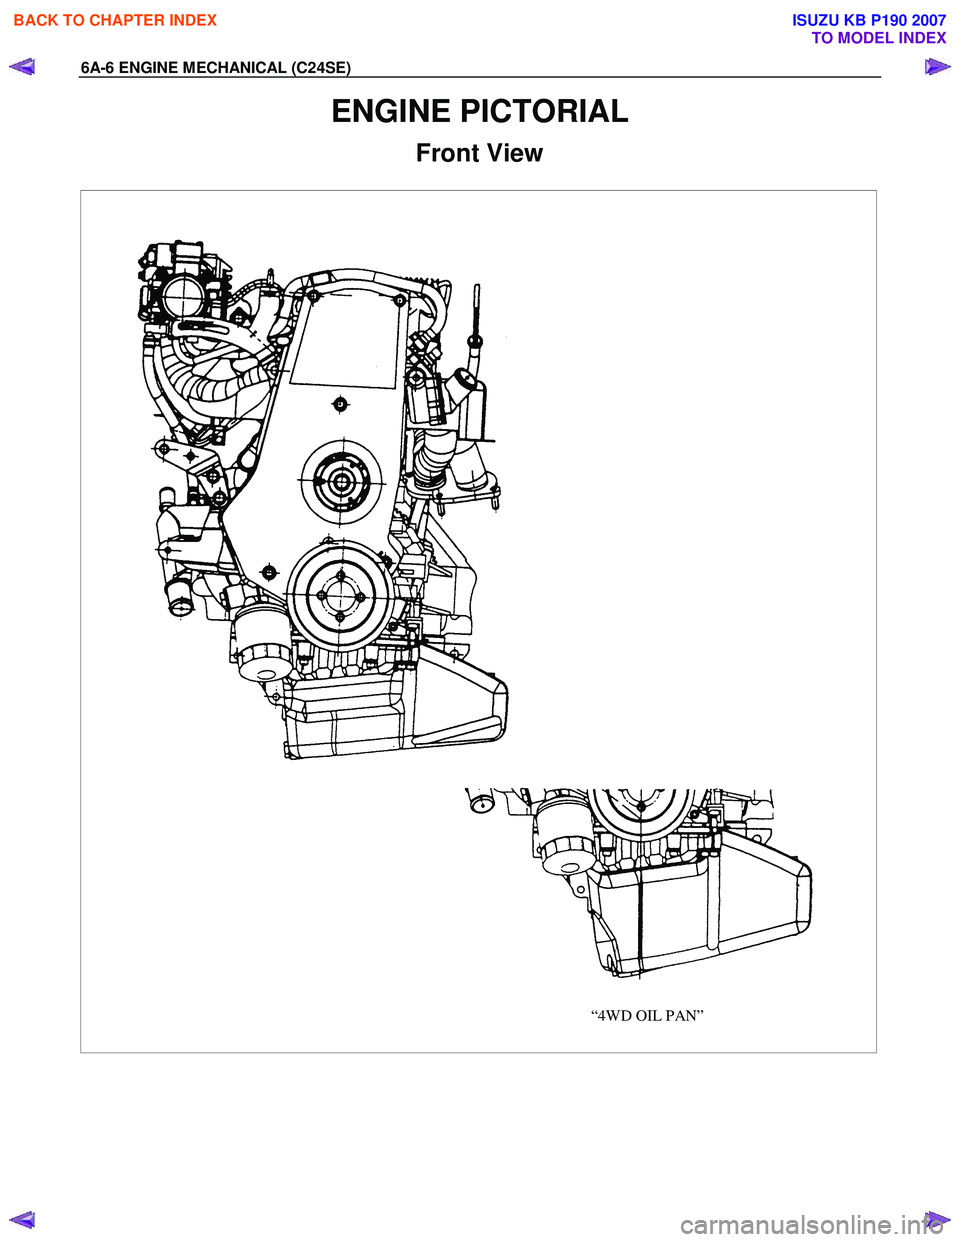 ISUZU KB P190 2007  Workshop Repair Manual 6A-6 ENGINE MECHANICAL (C24SE) 
ENGINE PICTORIAL 
Front View 
“4WD OIL PAN”
 
 
BACK TO CHAPTER INDEX
TO MODEL INDEX
ISUZU KB P190 2007 